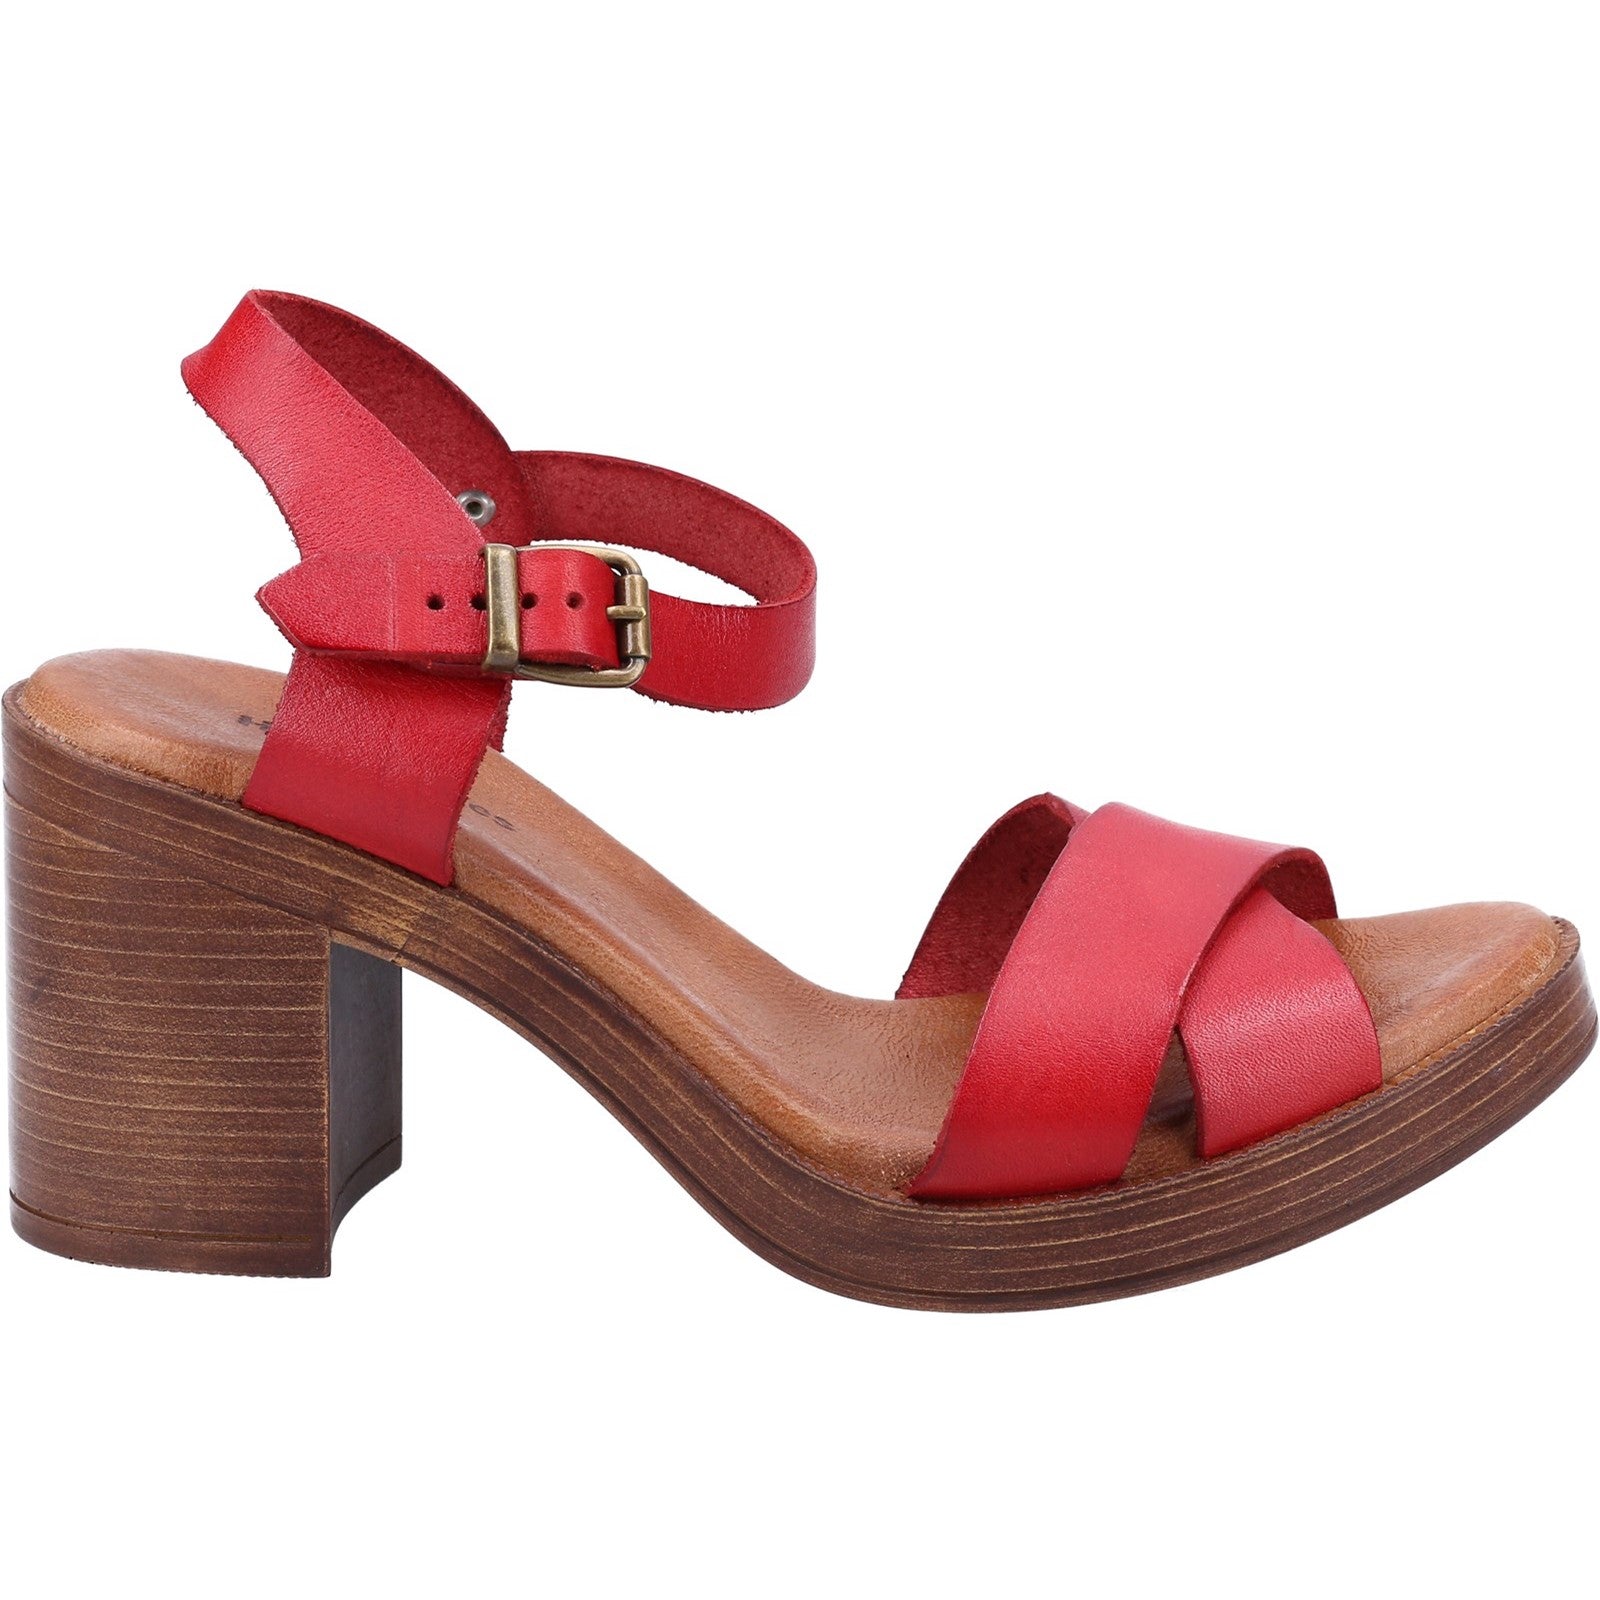 Hush Puppies Womens Georgia Leather Sandal - Red